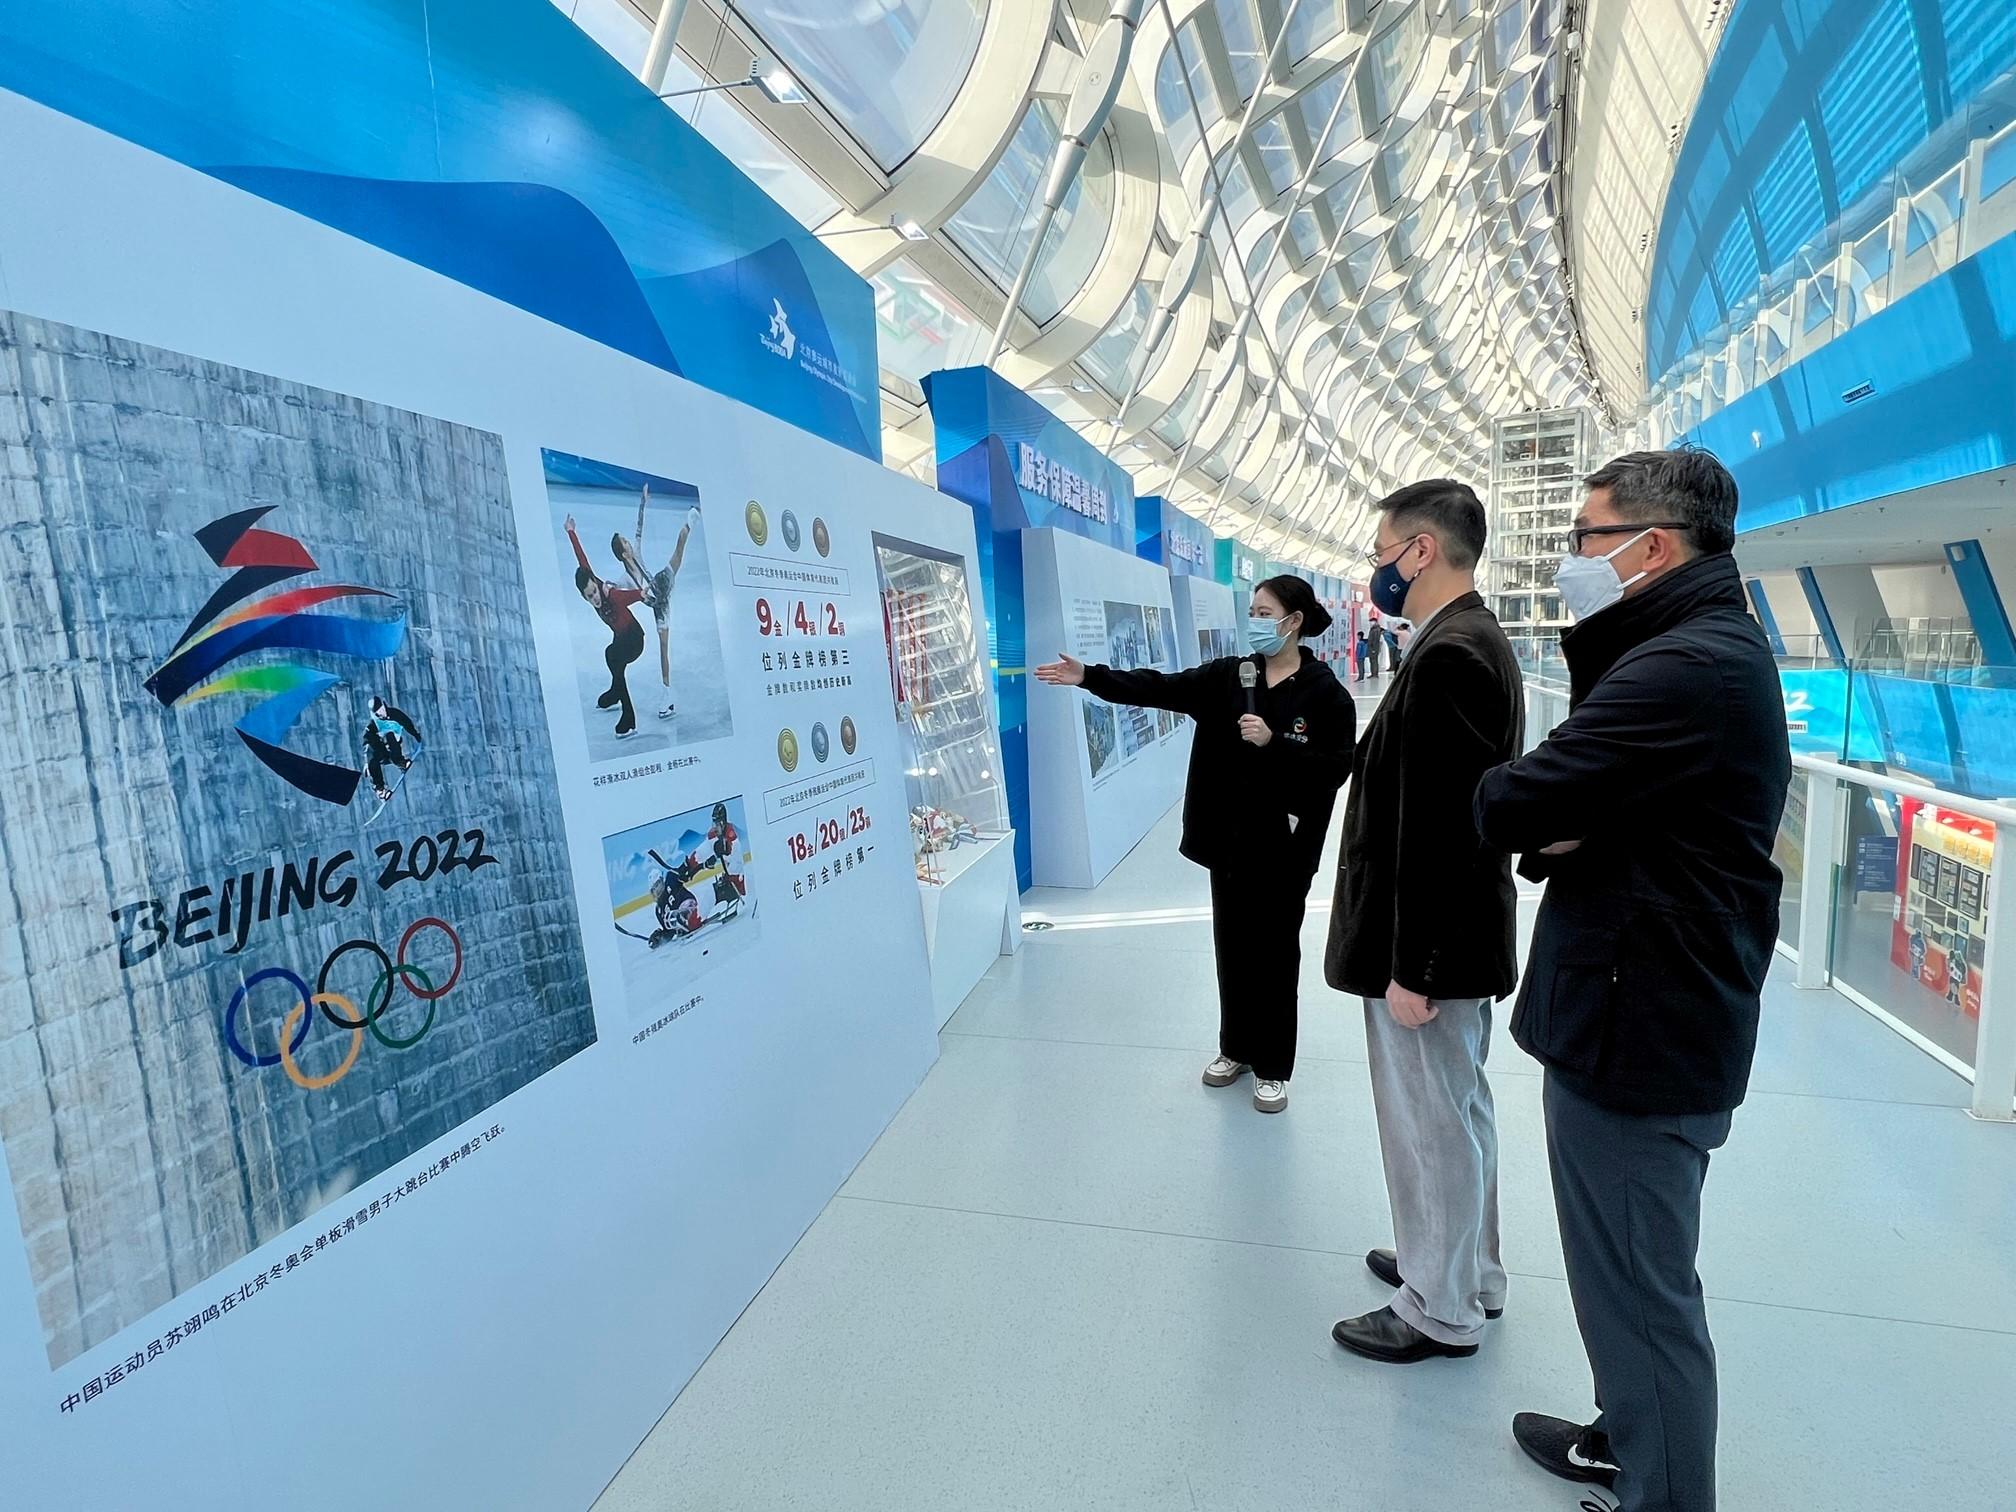 Accompanied by the Acting Commissioner for Sports, Mr Paul Cheng (right), the Secretary for Culture, Sports and Tourism, Mr Kevin Yeung (centre), yesterday (March 12) visited an exhibition at the National Speed Skating Oval in Beijing. 
